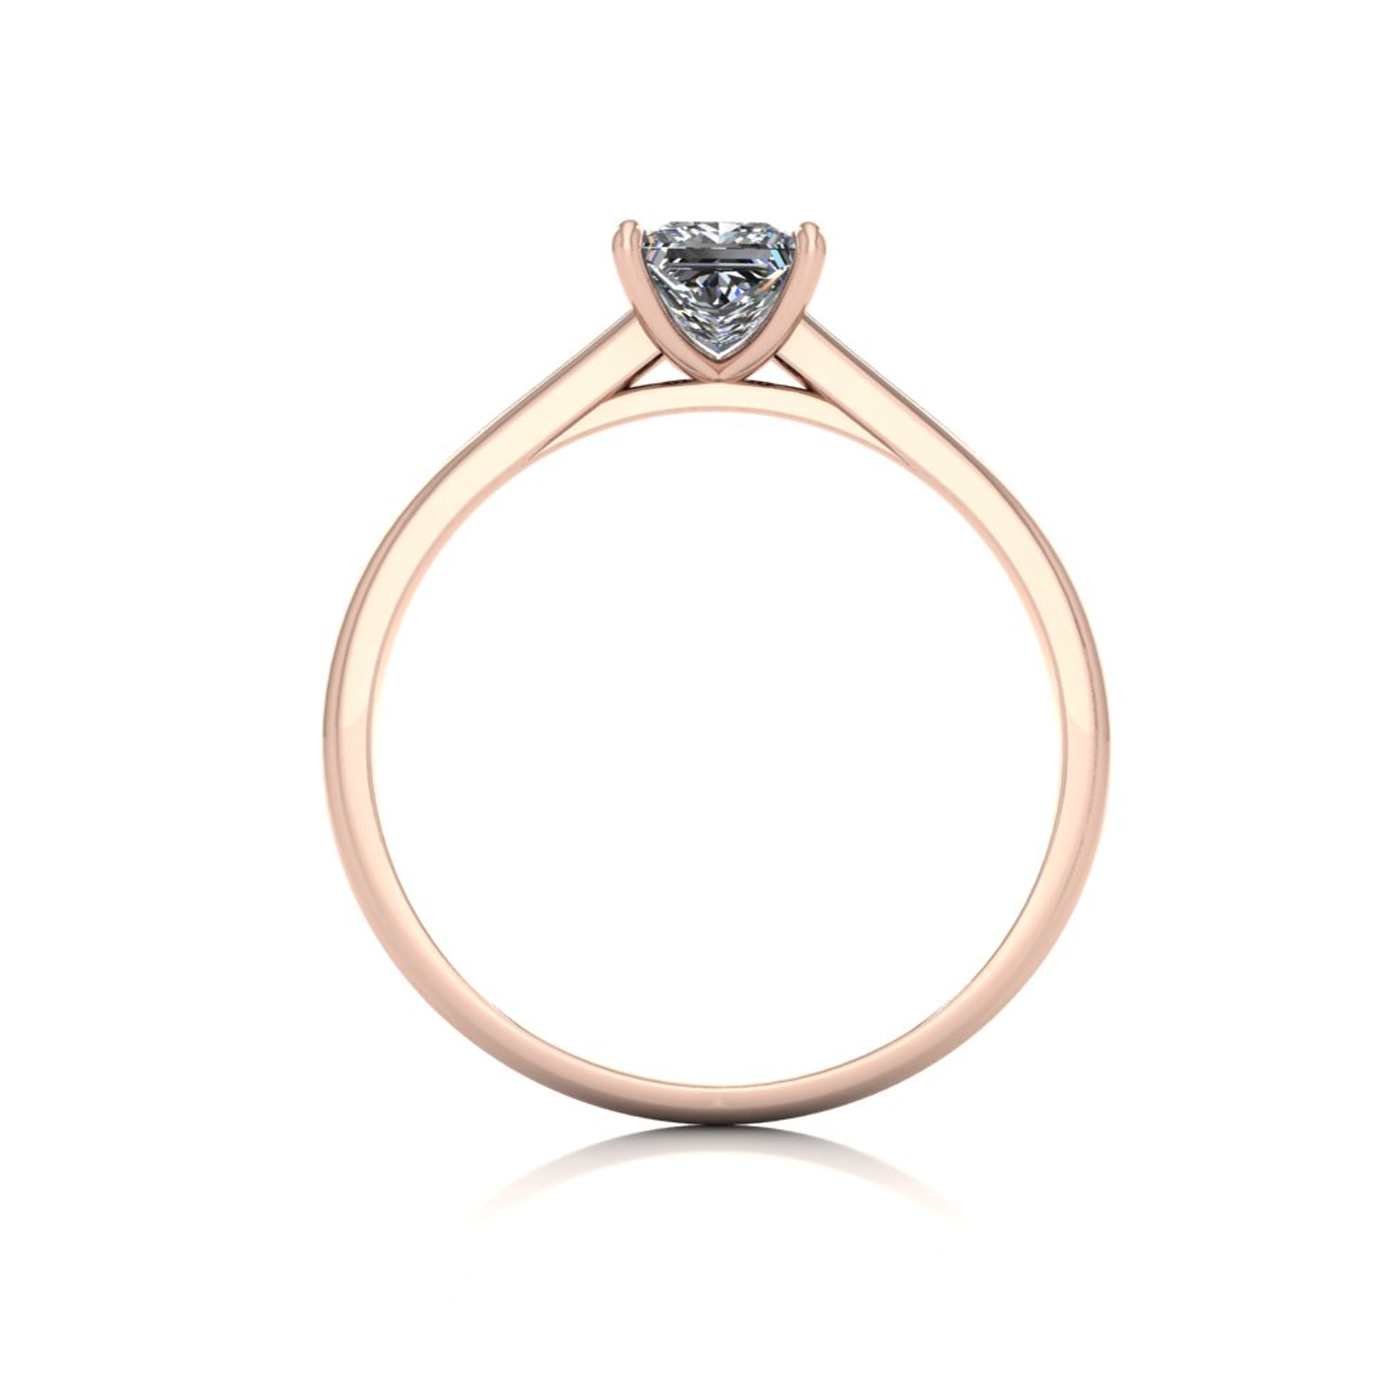 18k rose gold  0,50 ct 4 prongs solitaire princess cut diamond engagement ring with whisper thin band